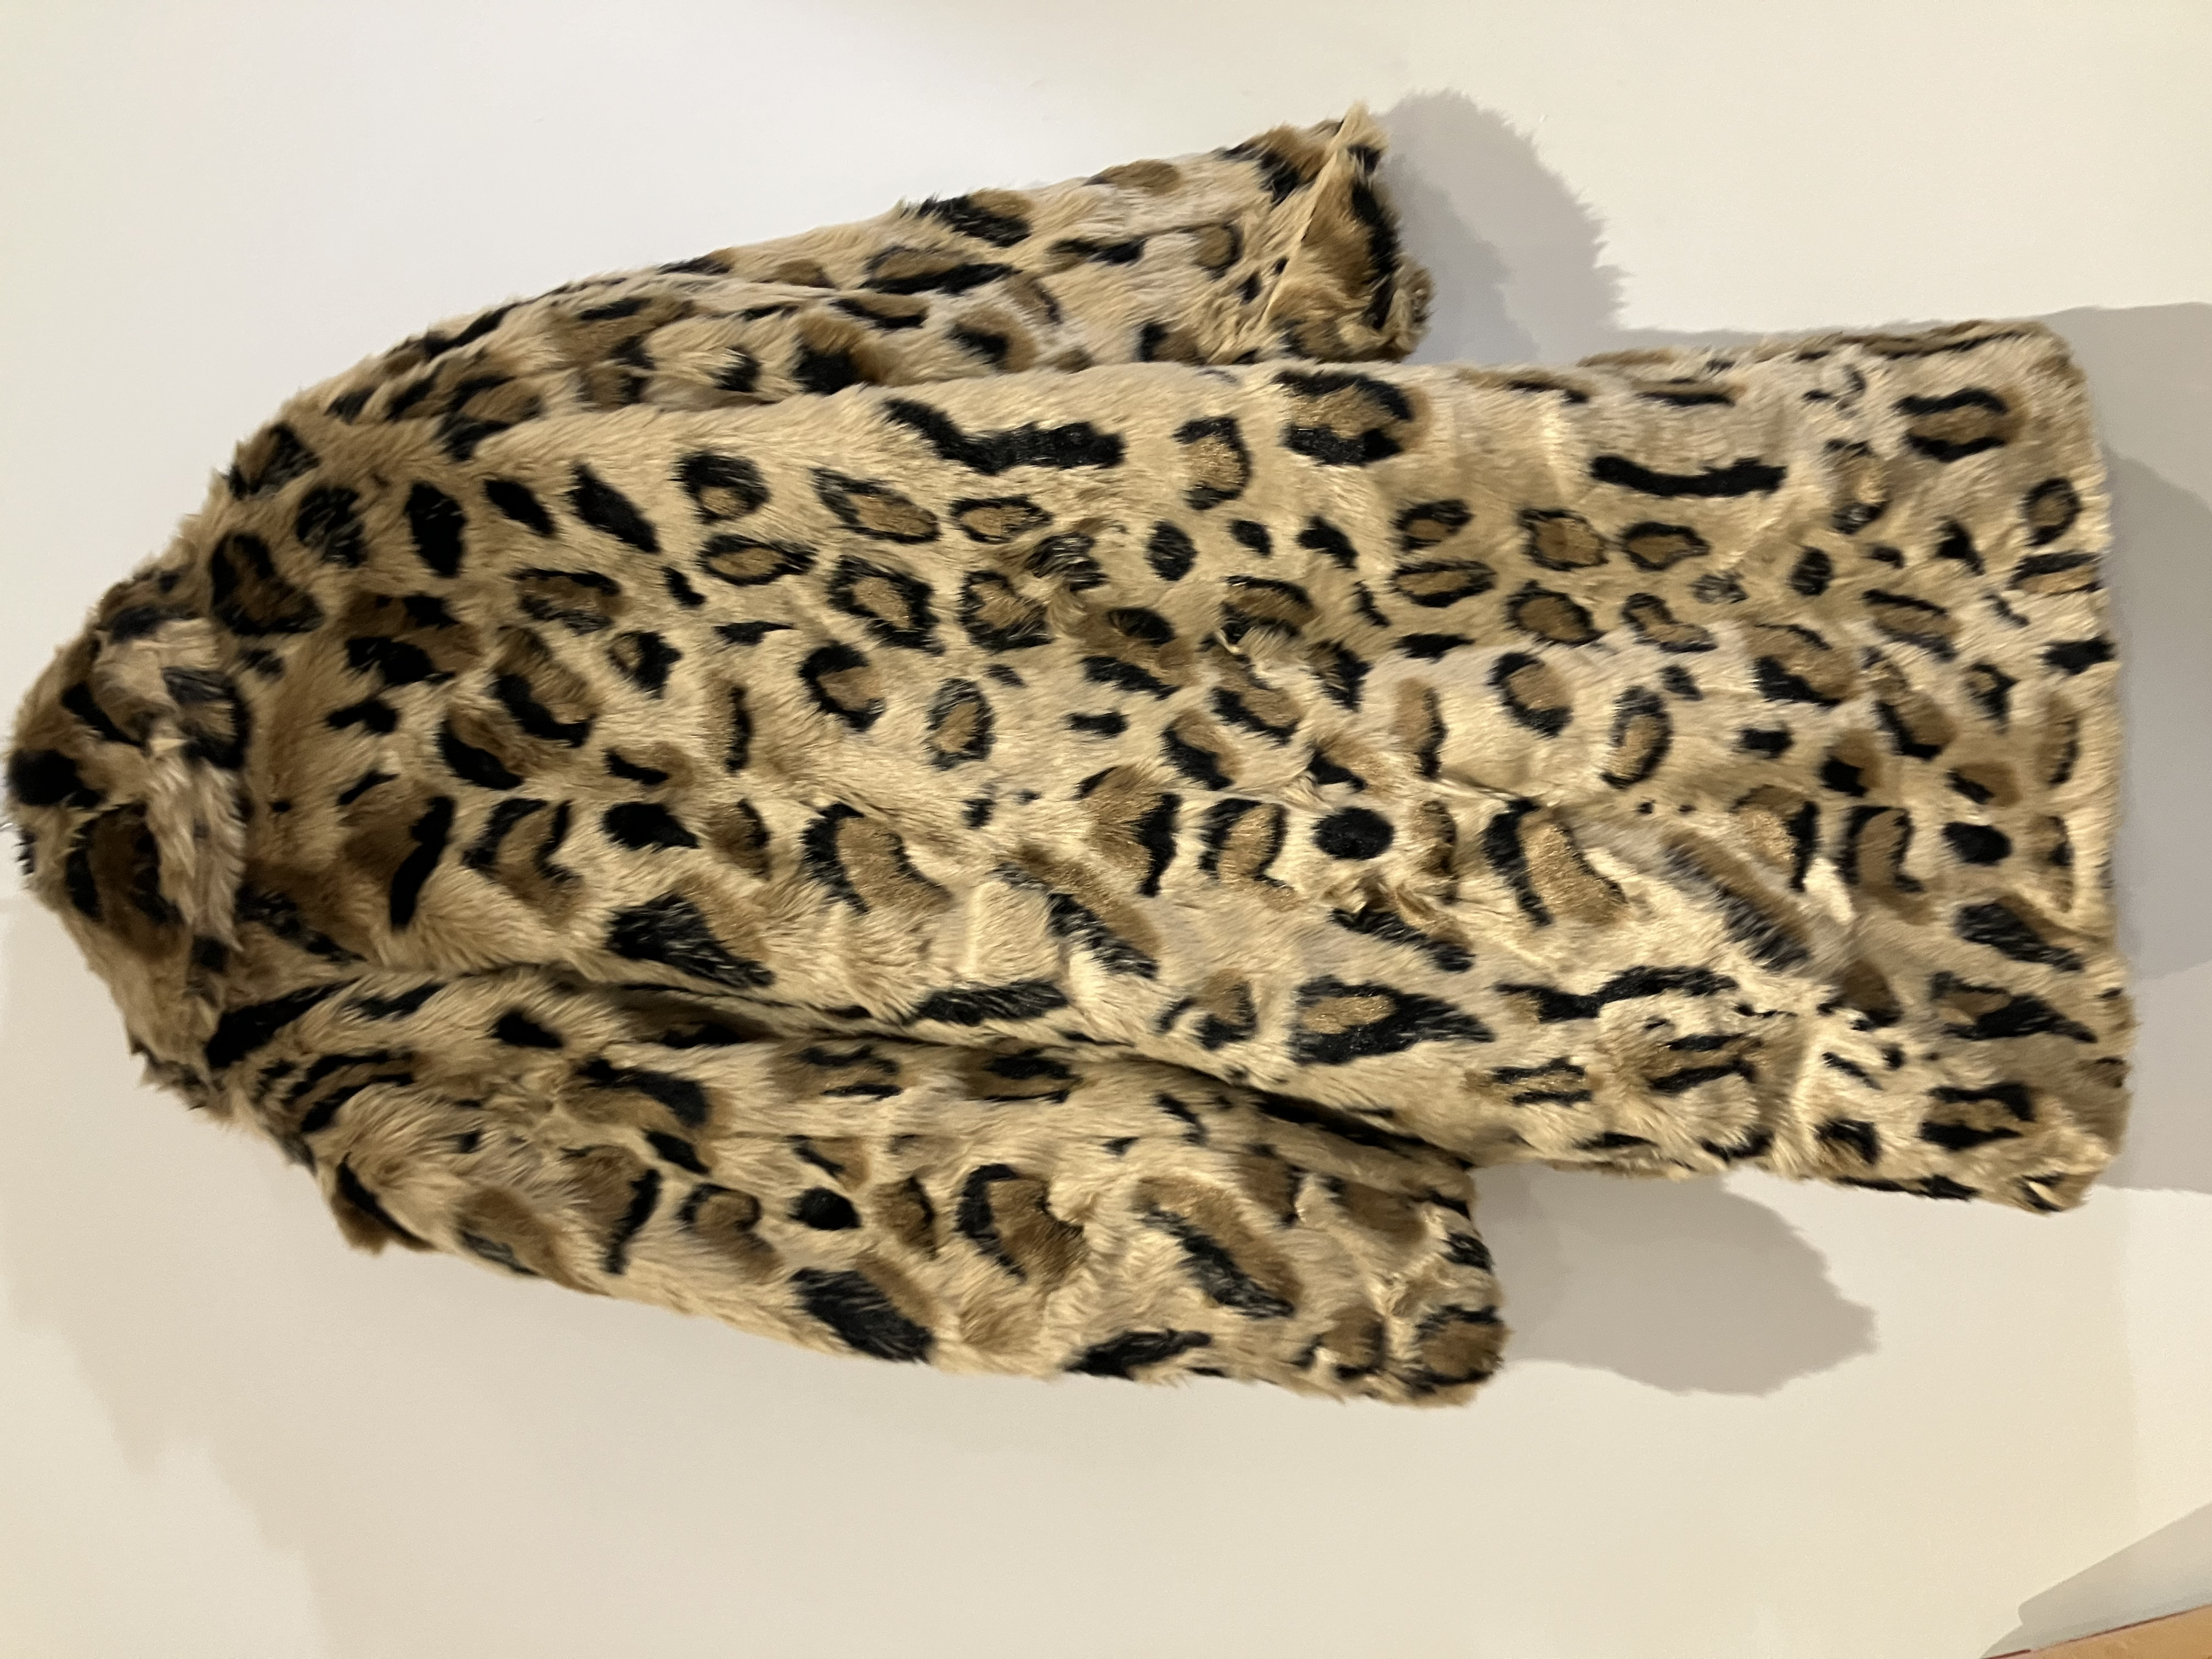 River Island Leopard Faux Fur Coat Worn By A Body Double. - Image 2 of 2